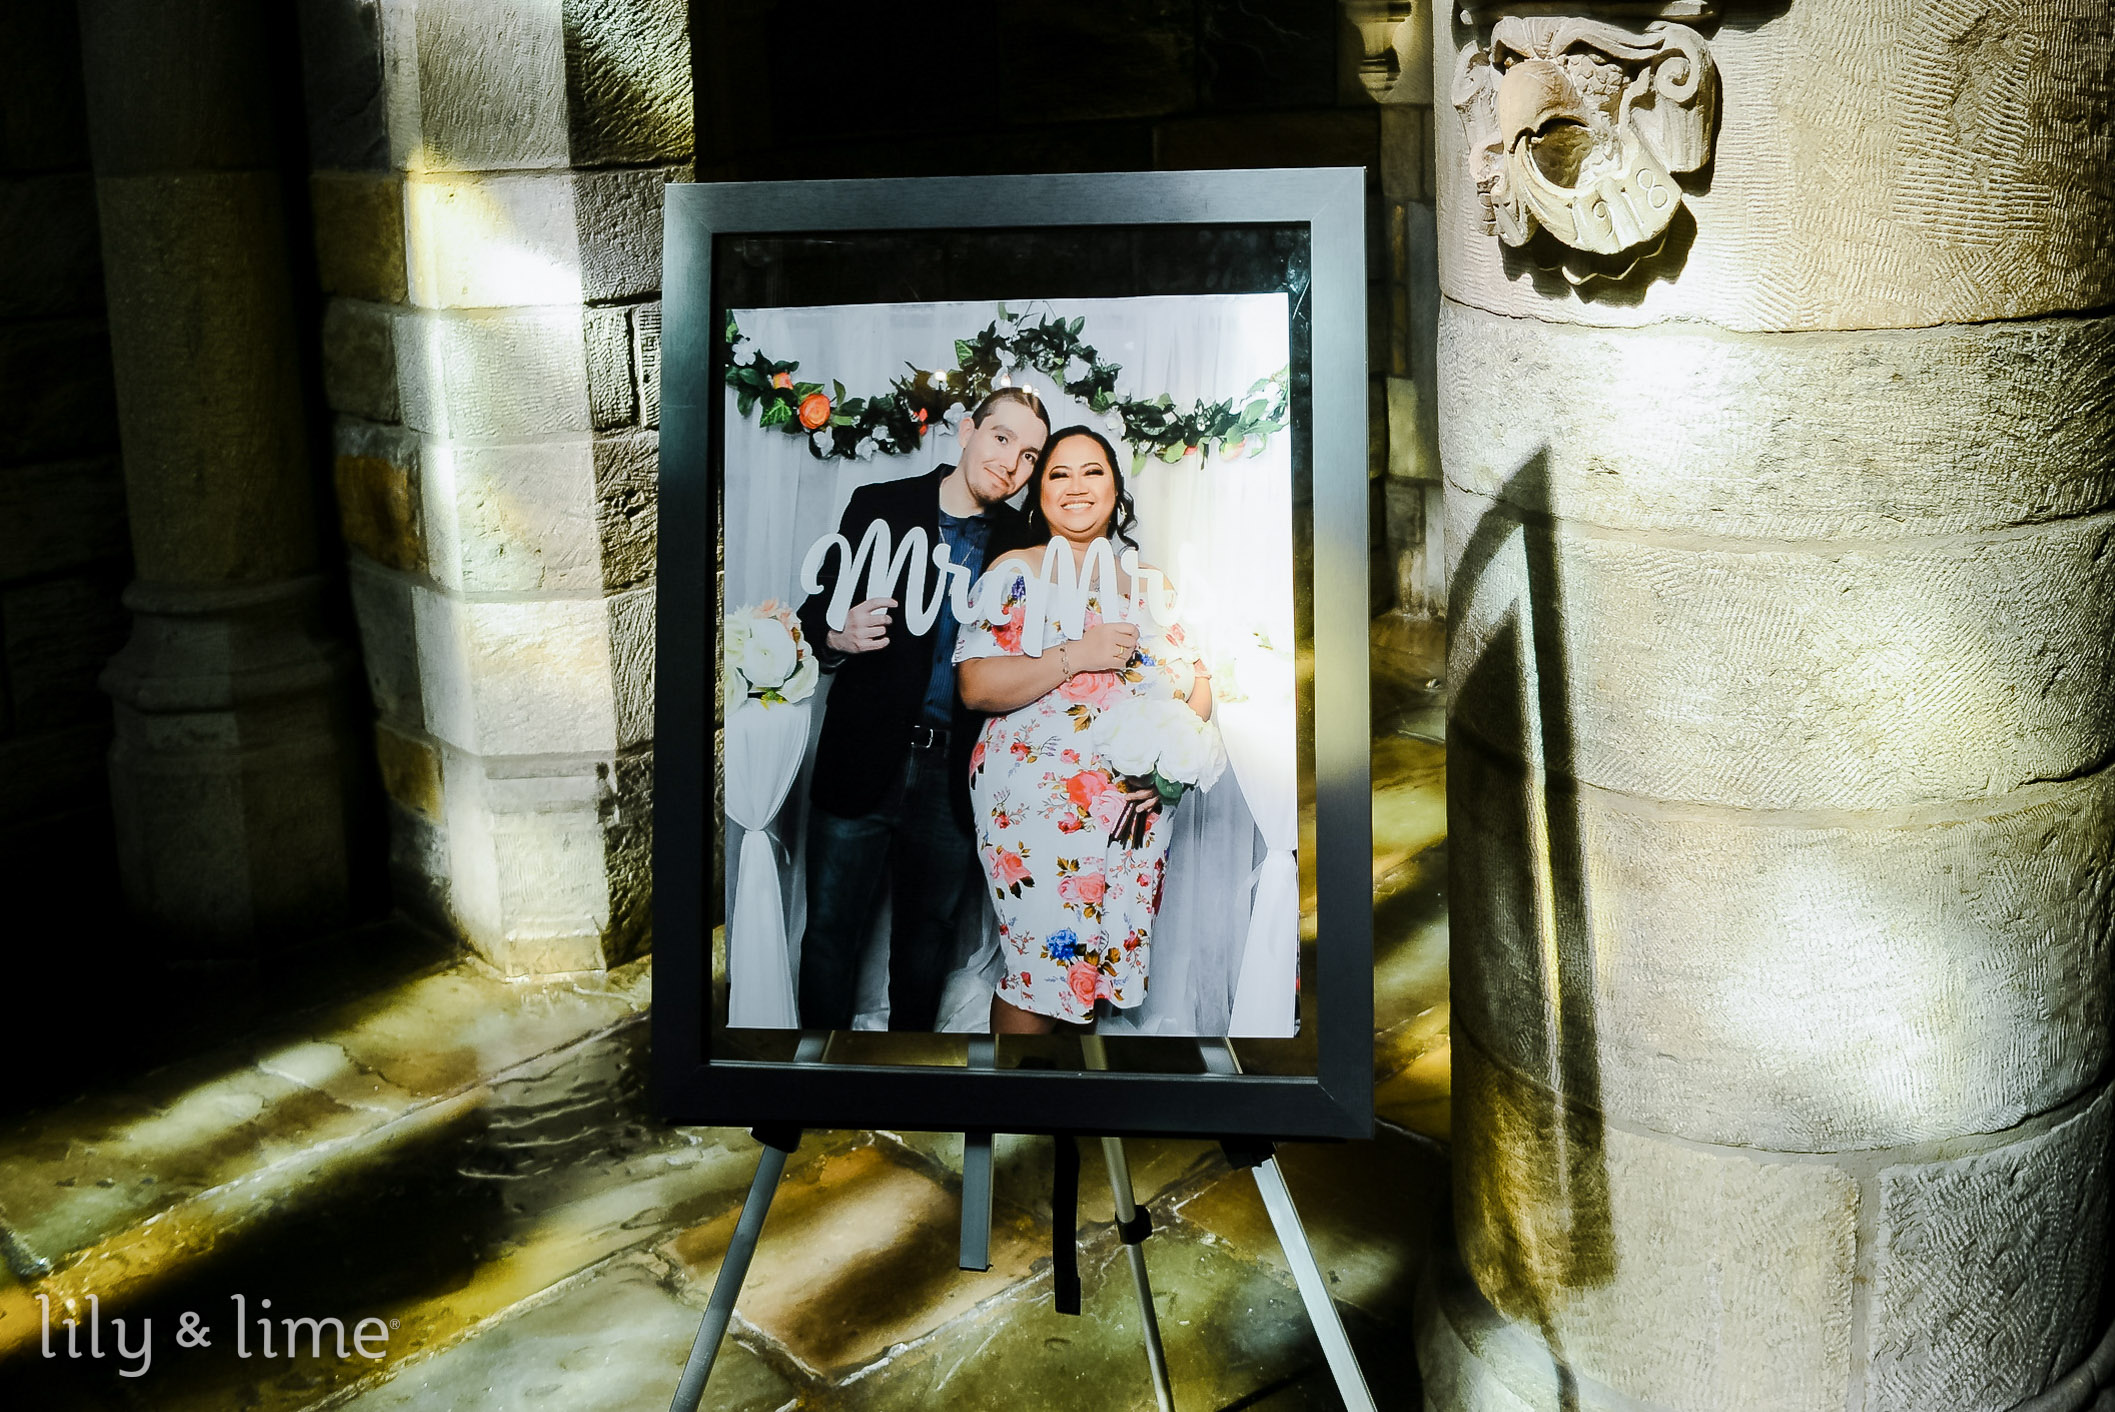 Elevate your wedding with a polaroid guest book that is made just for